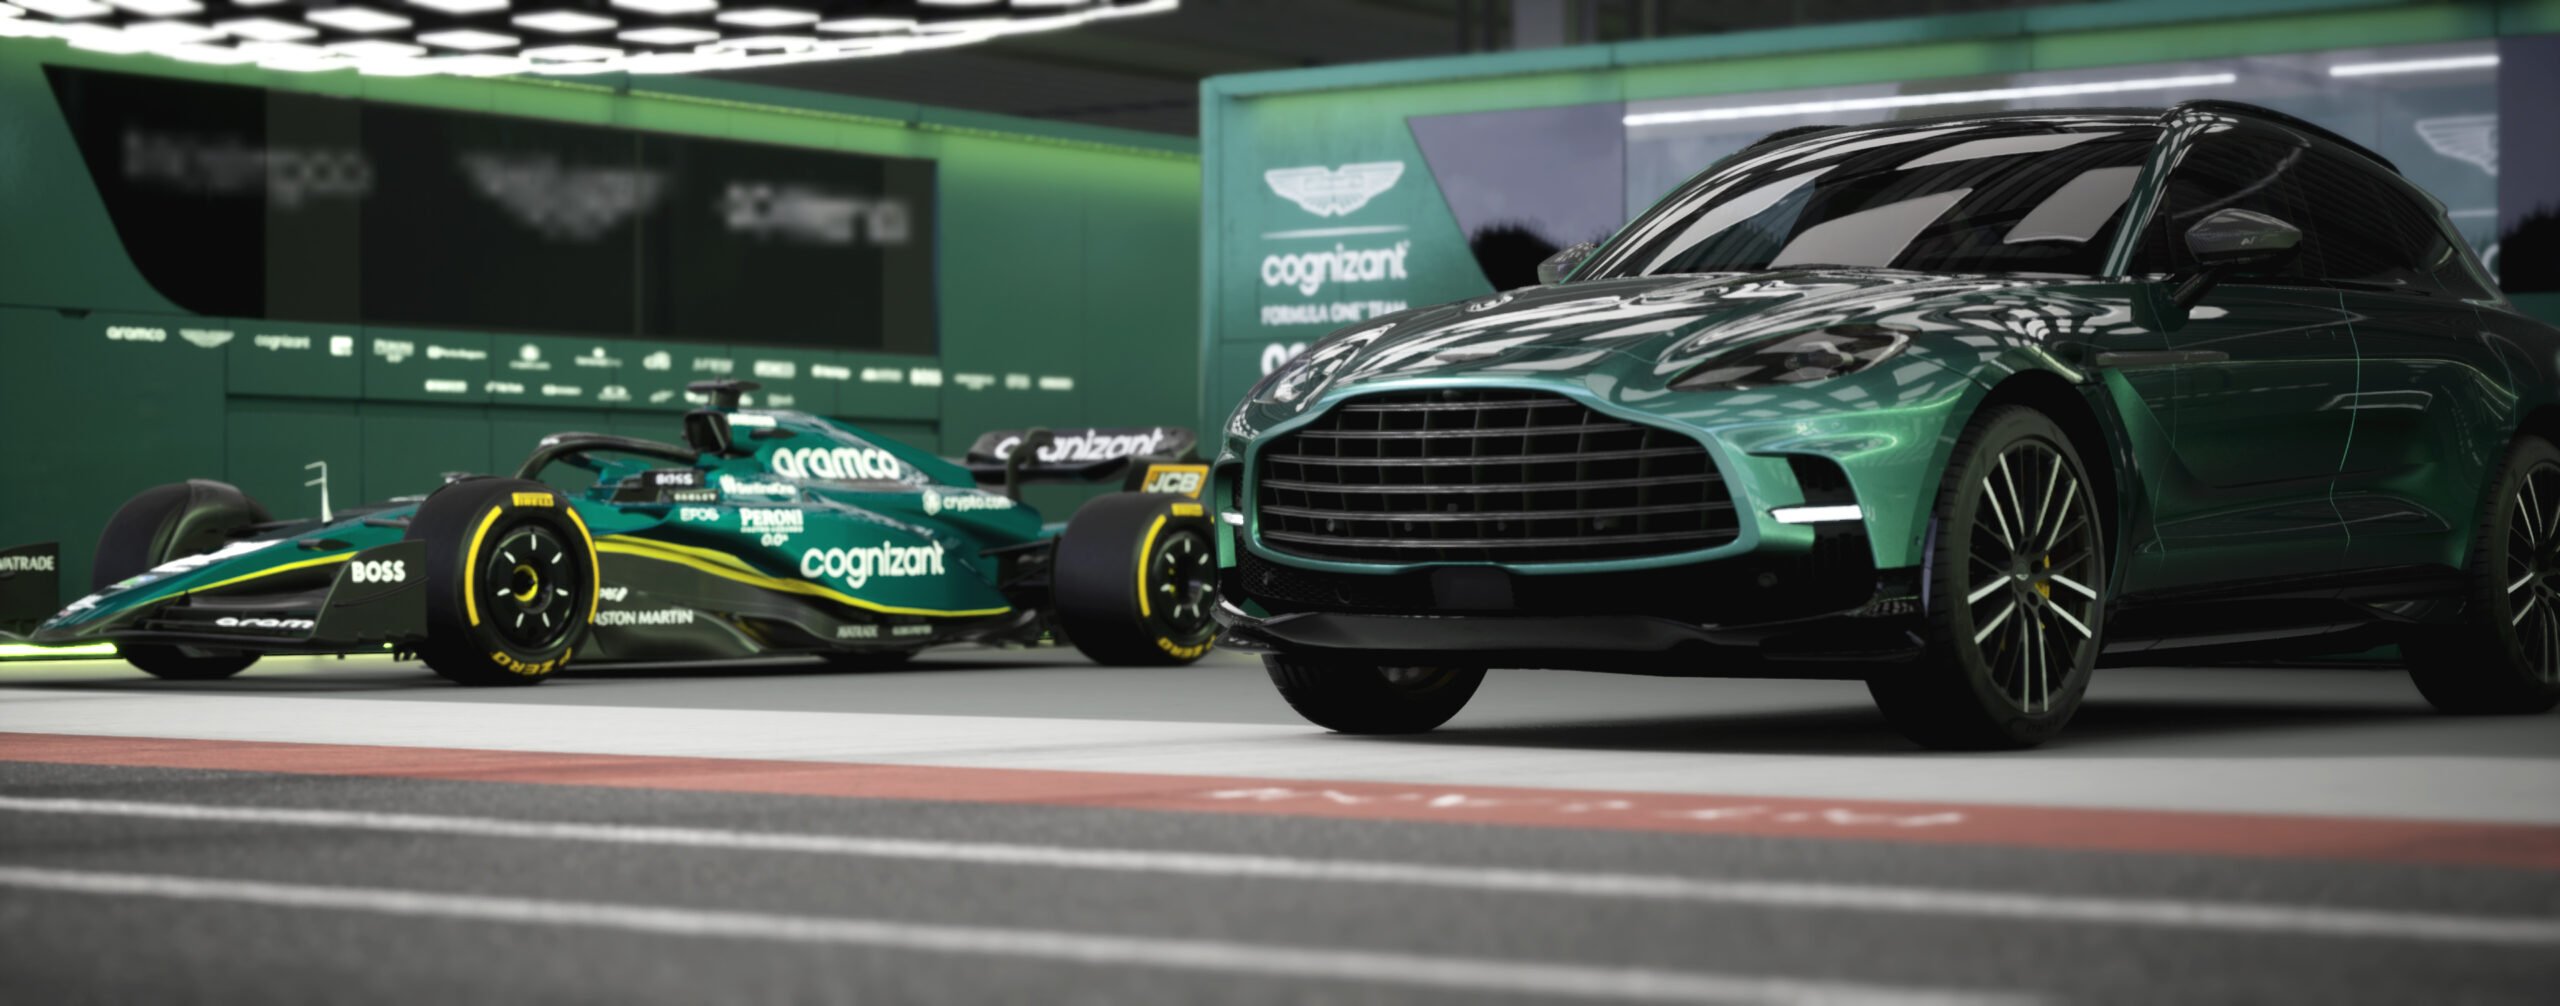 Aston Martin welcomes customers inside its F1 (R) pit garage to spec their dream car